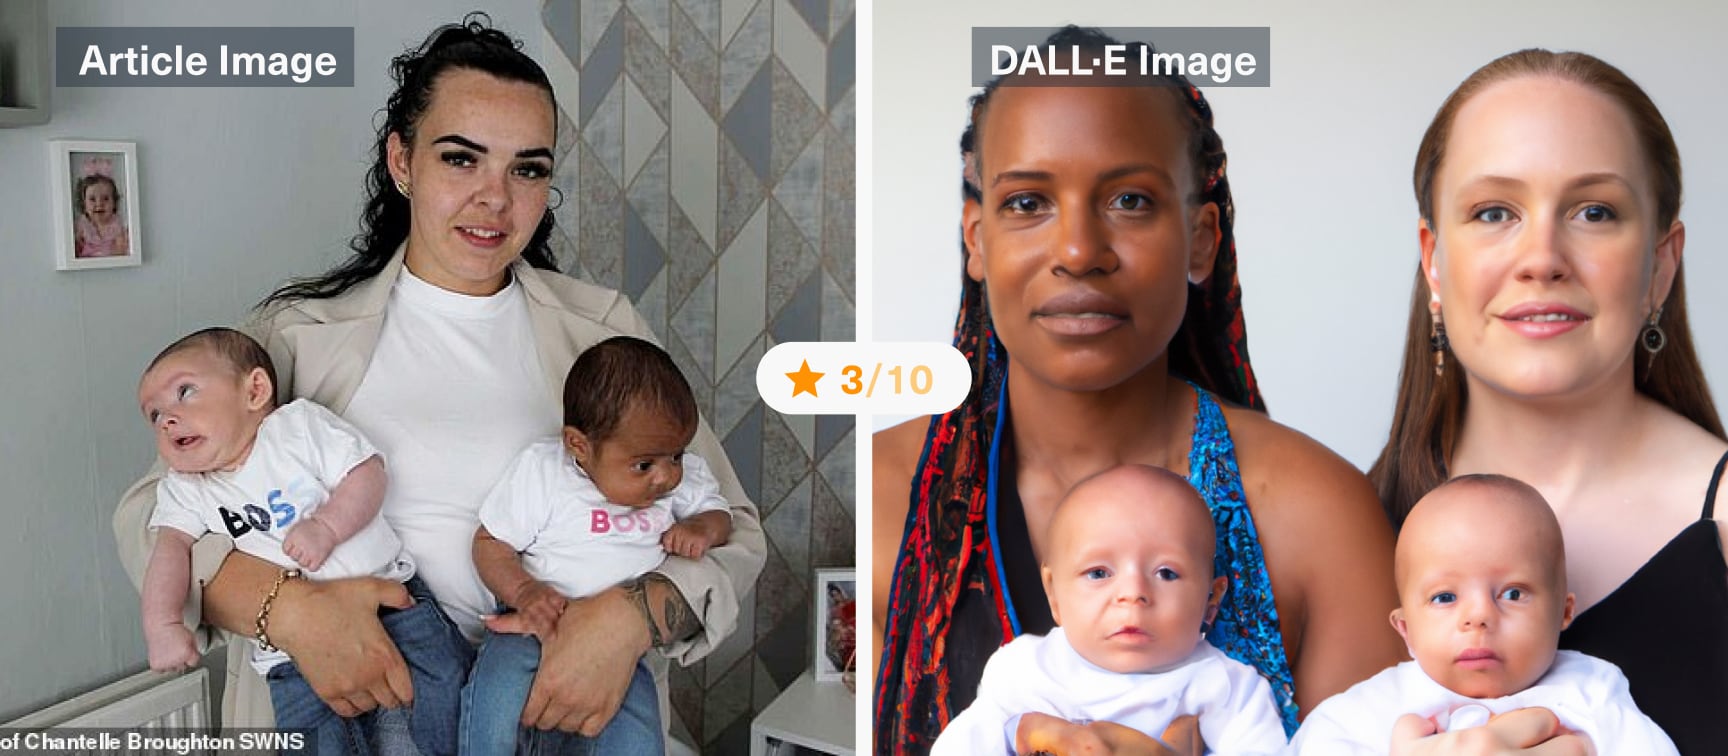 DALL-E meets News API: “White mother with half-Jamaican partner has twins with completely different skin tones”